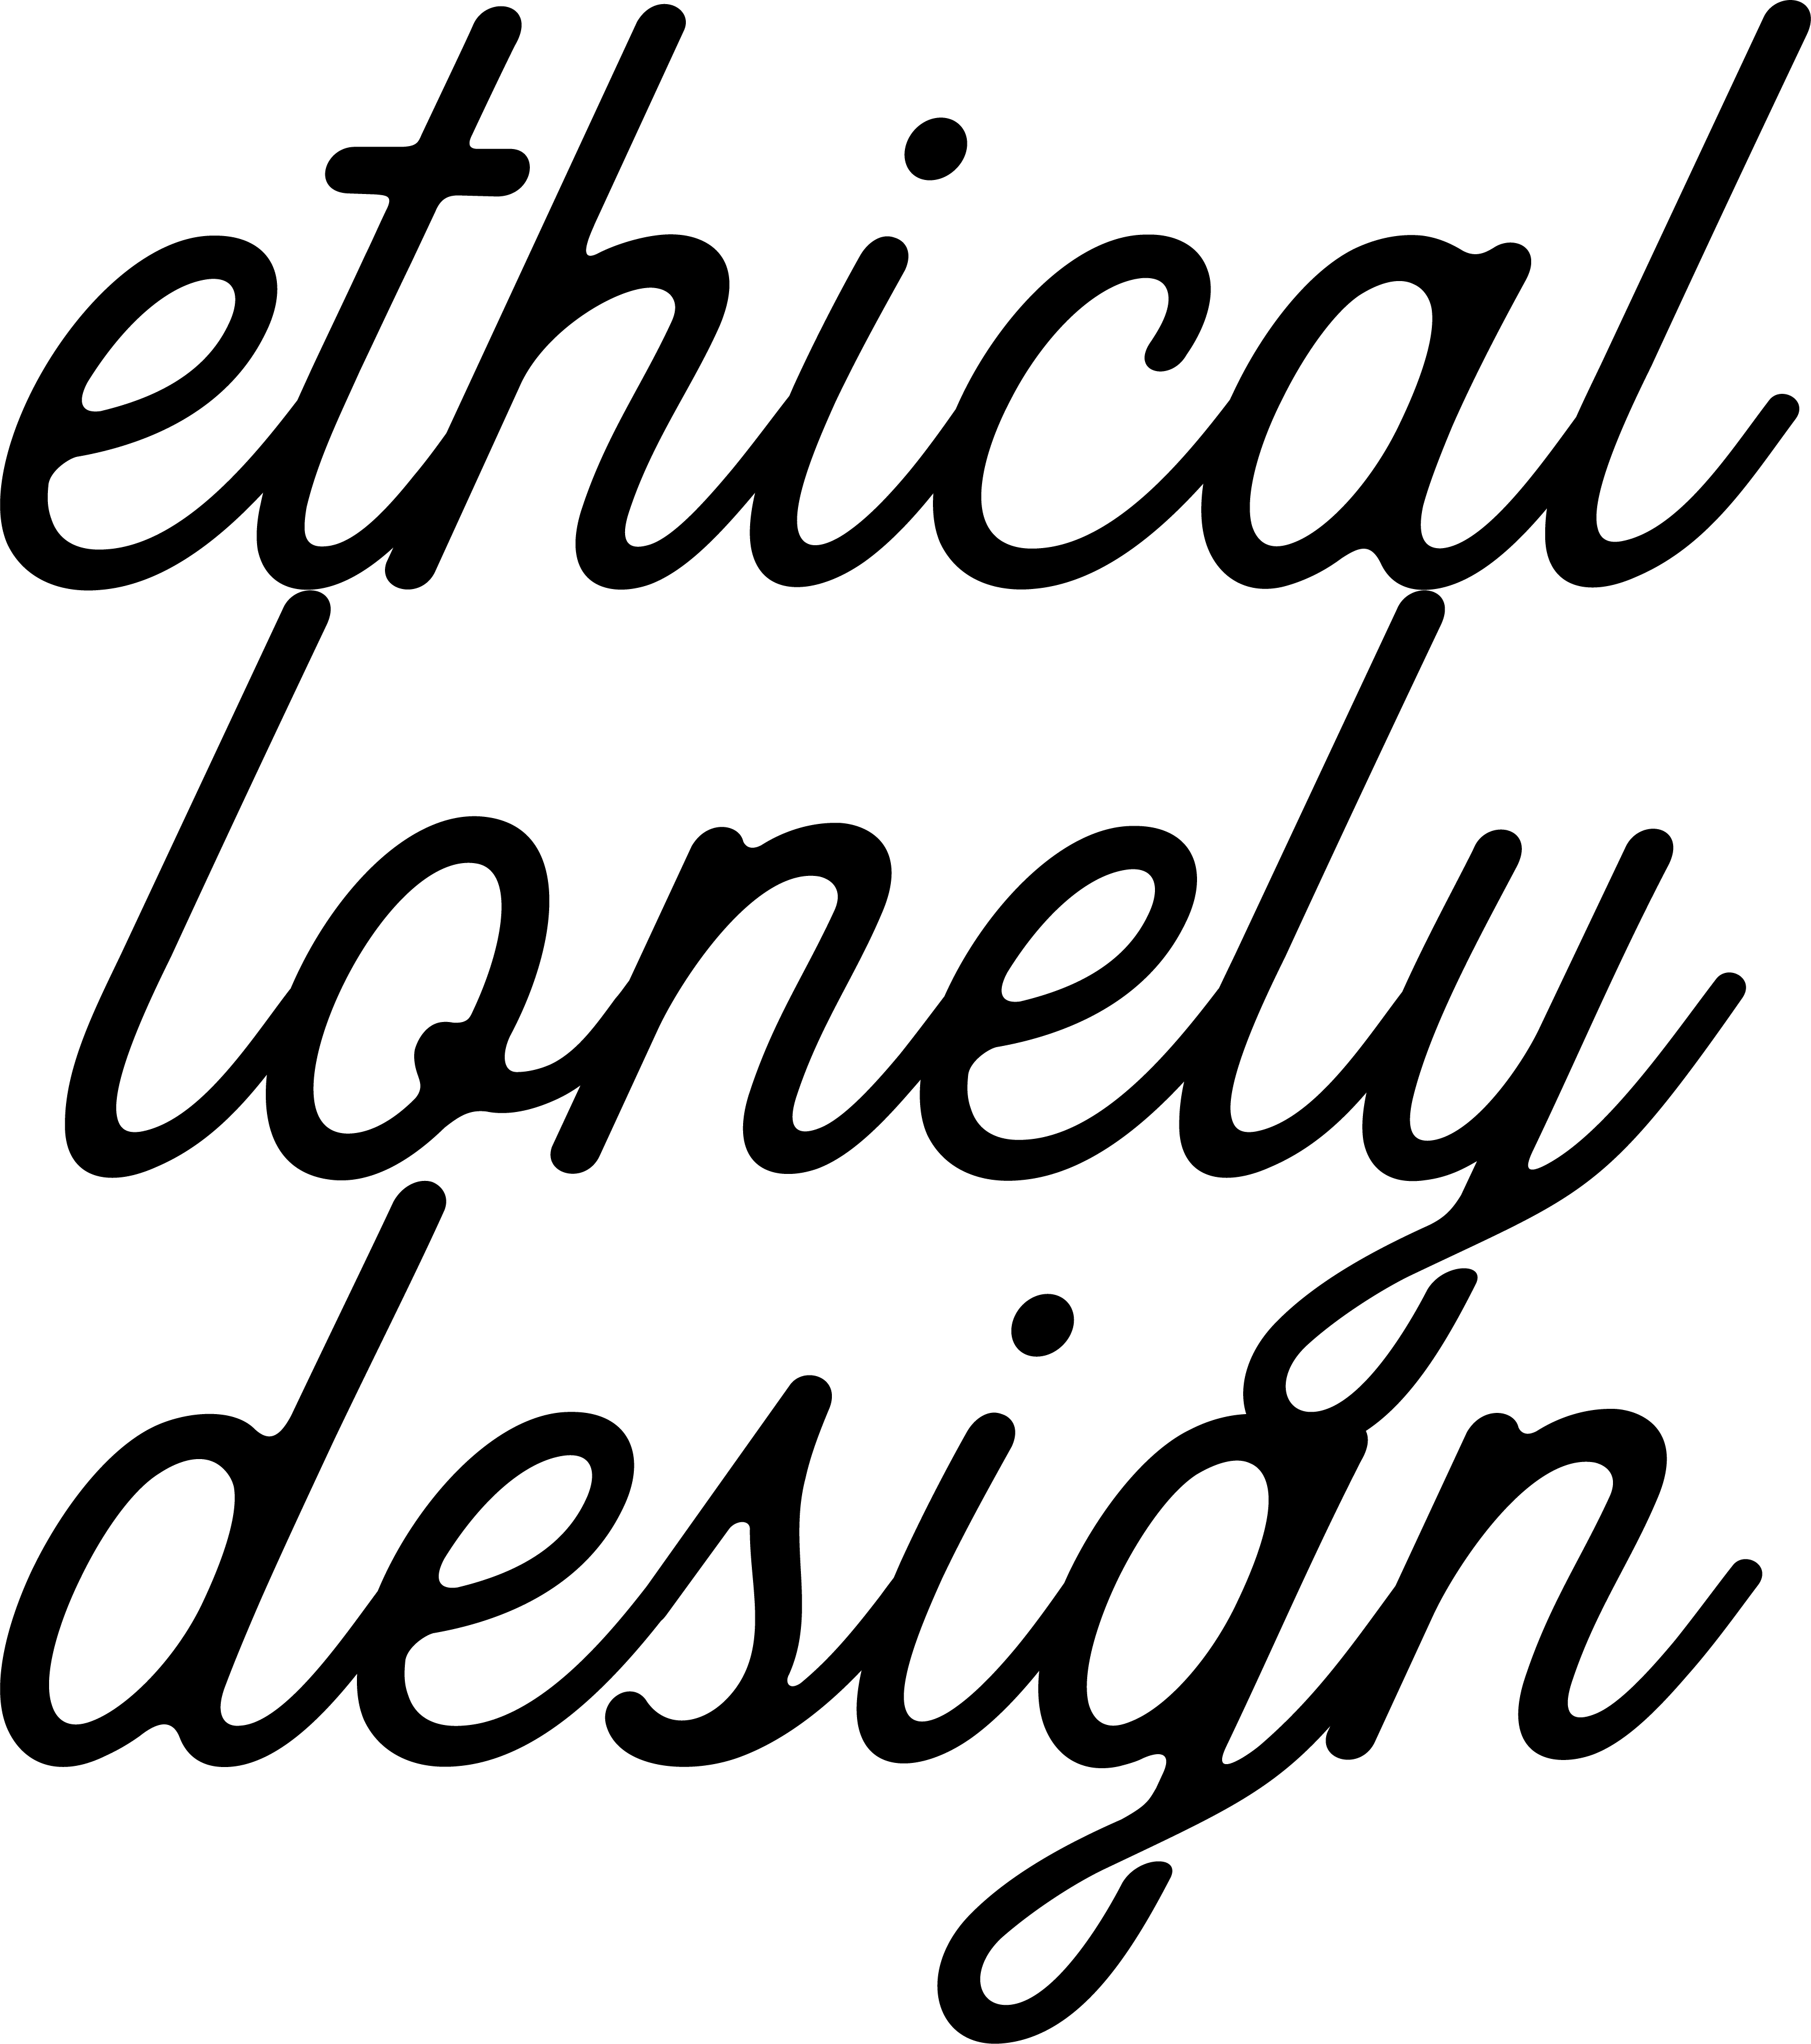 Ethical Lonely Design